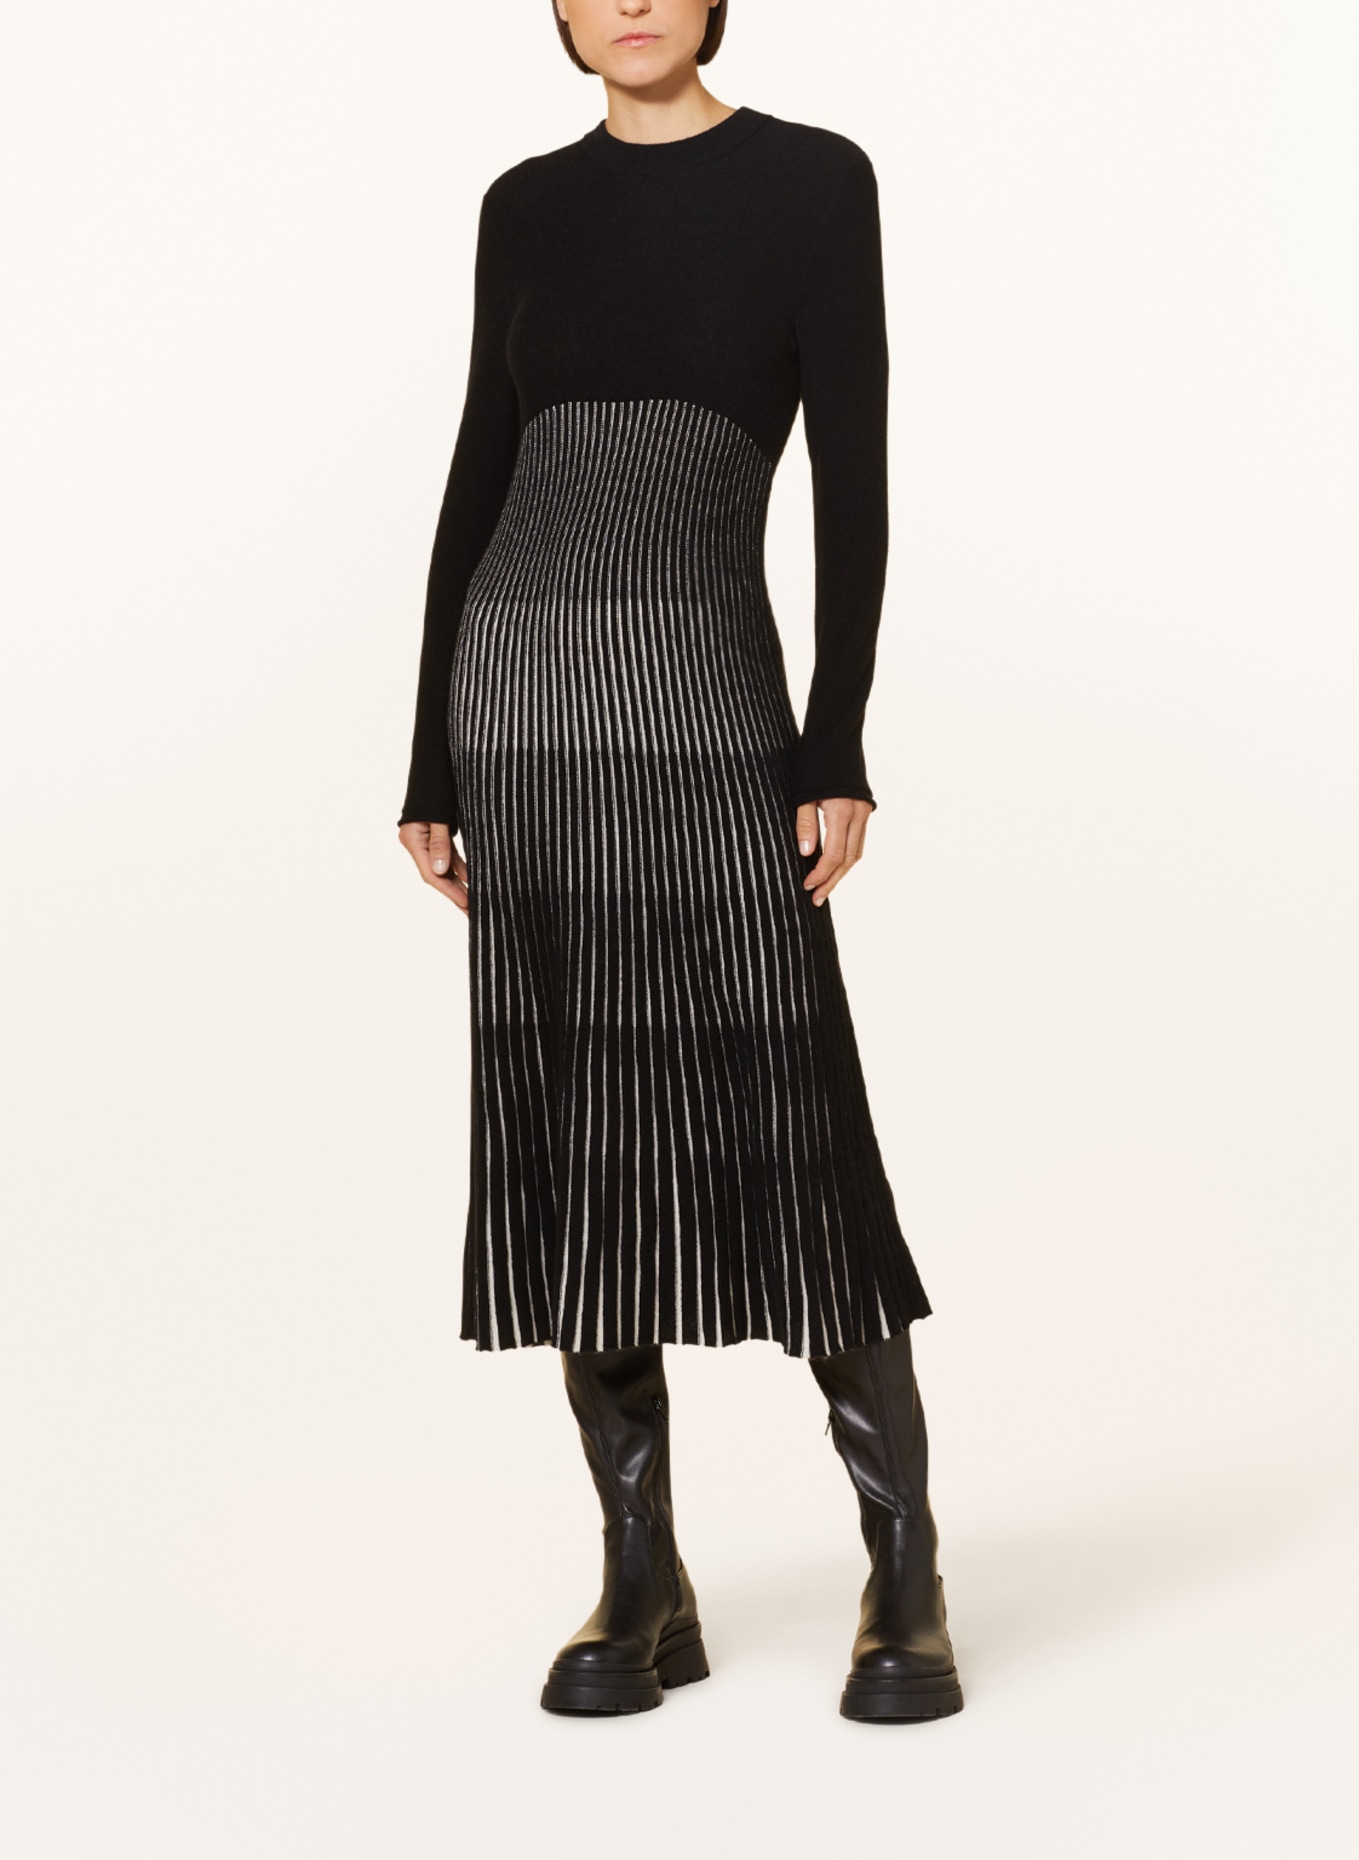 Ribbed-knit cashmere dress FINLEY By LISA YANG - Shop Online at